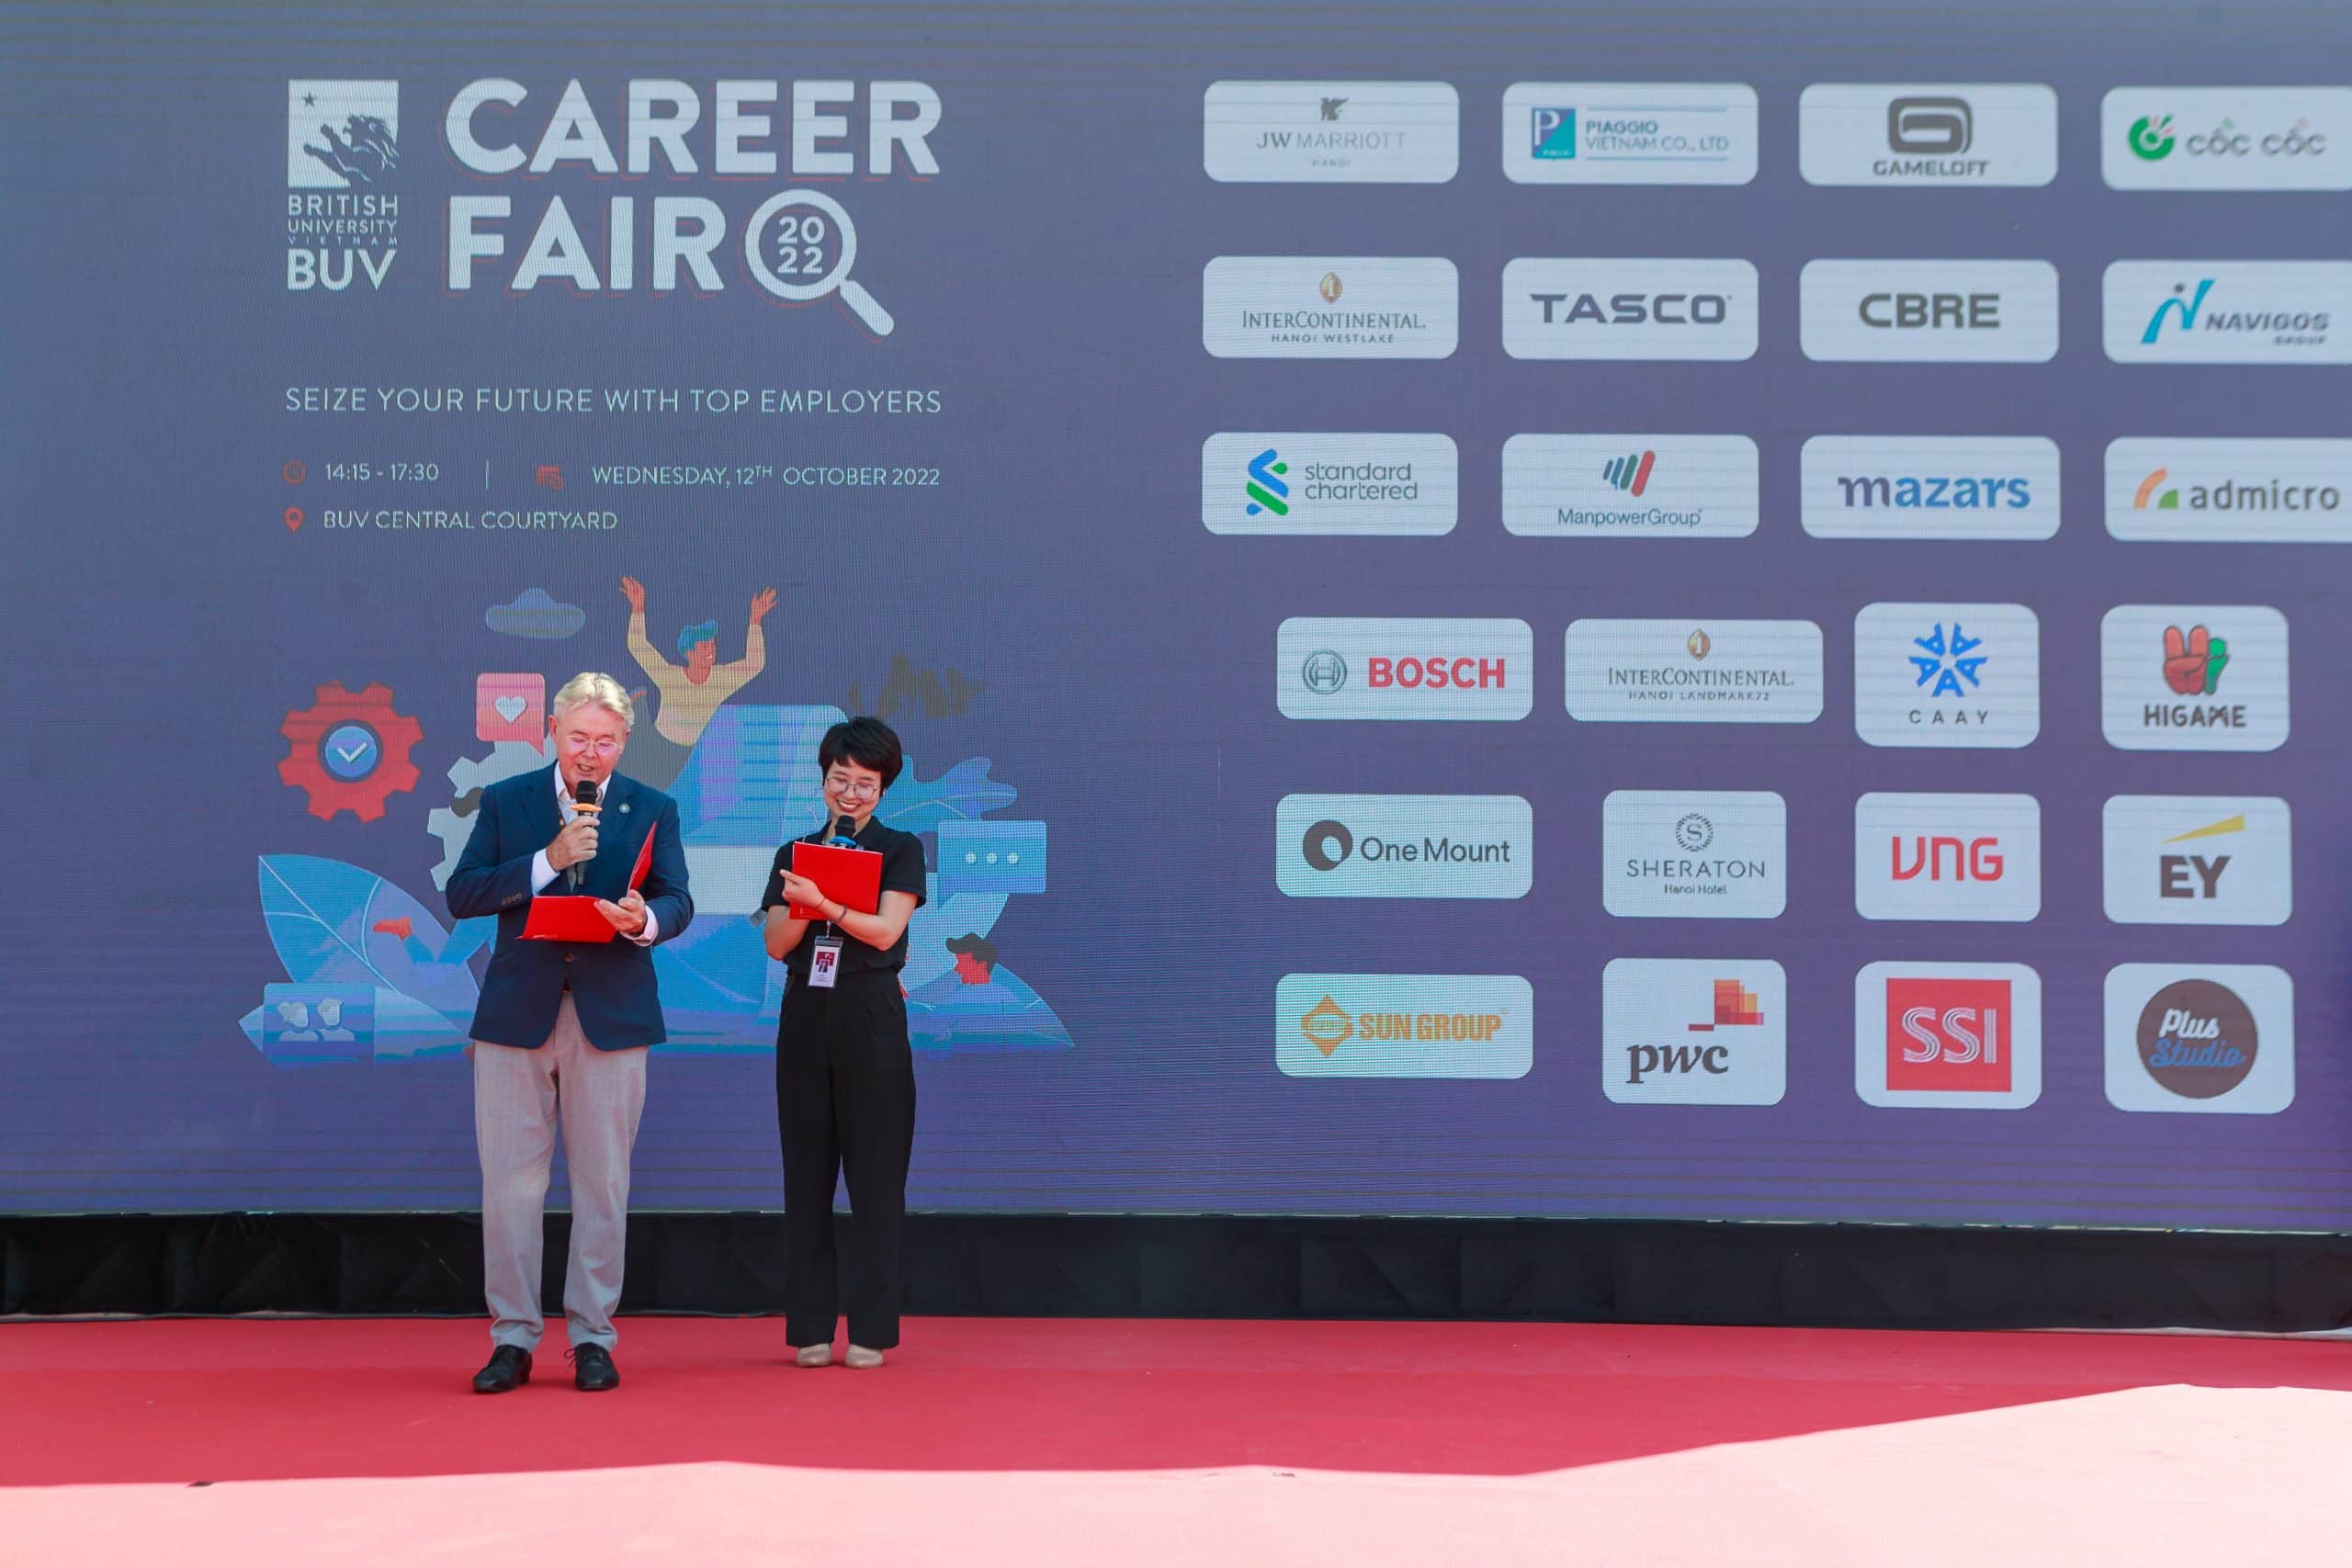 BUV Career Fair 2022: Seize your future with top employers